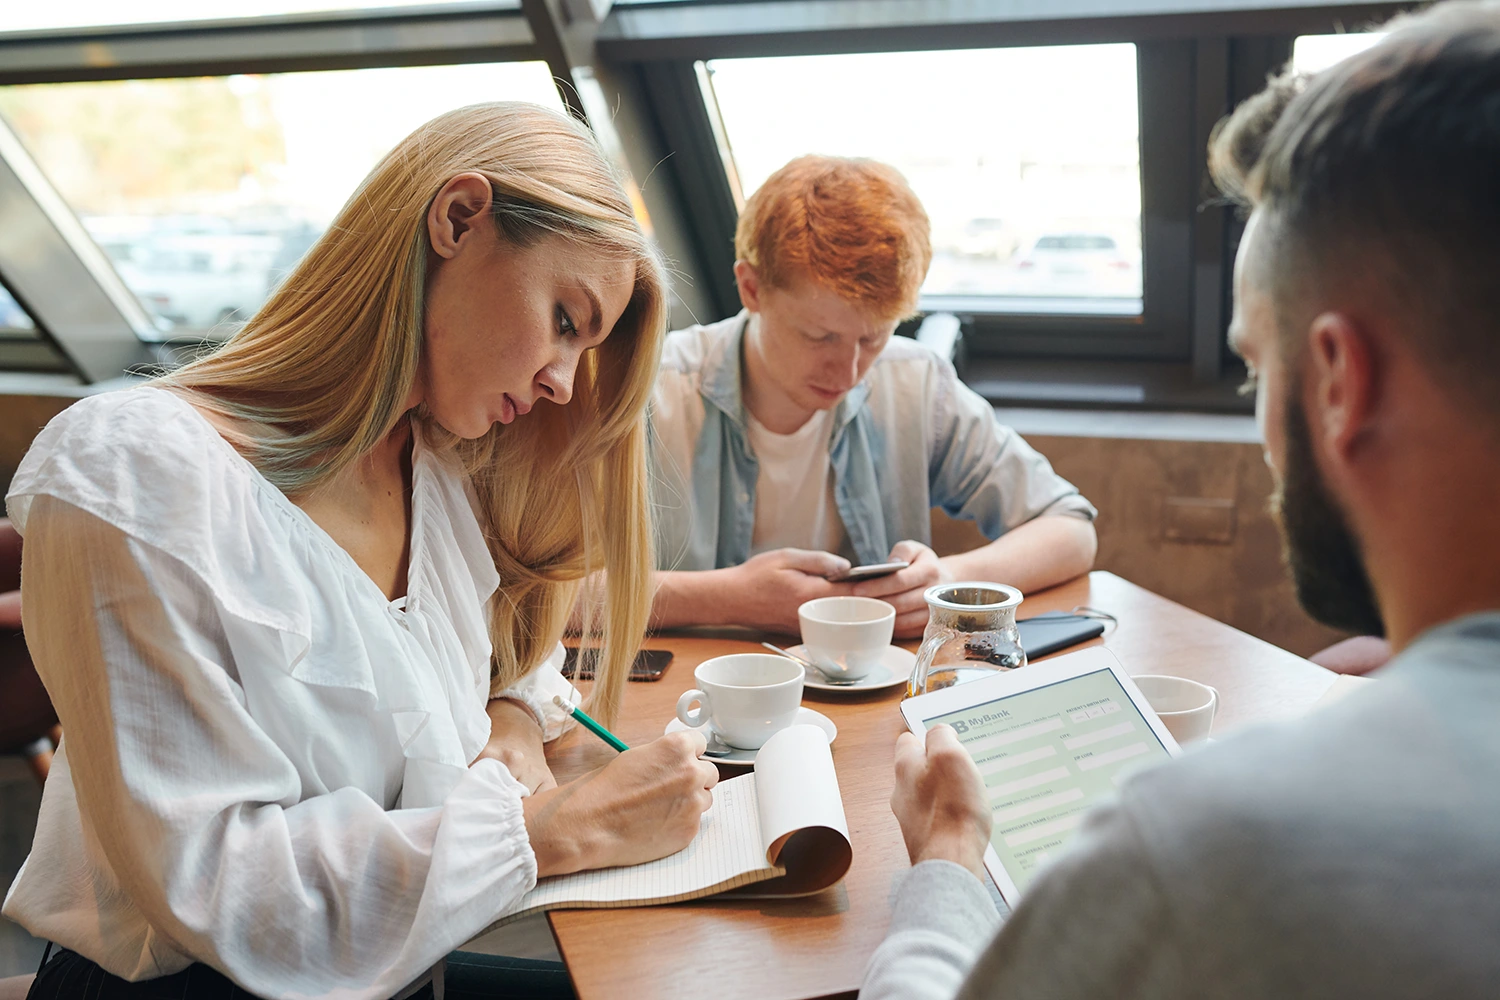 A CRM for your restaurant should be a top priority. In this image, two men and a woman sit at a restaurant table, each engaged in their own pursuits.